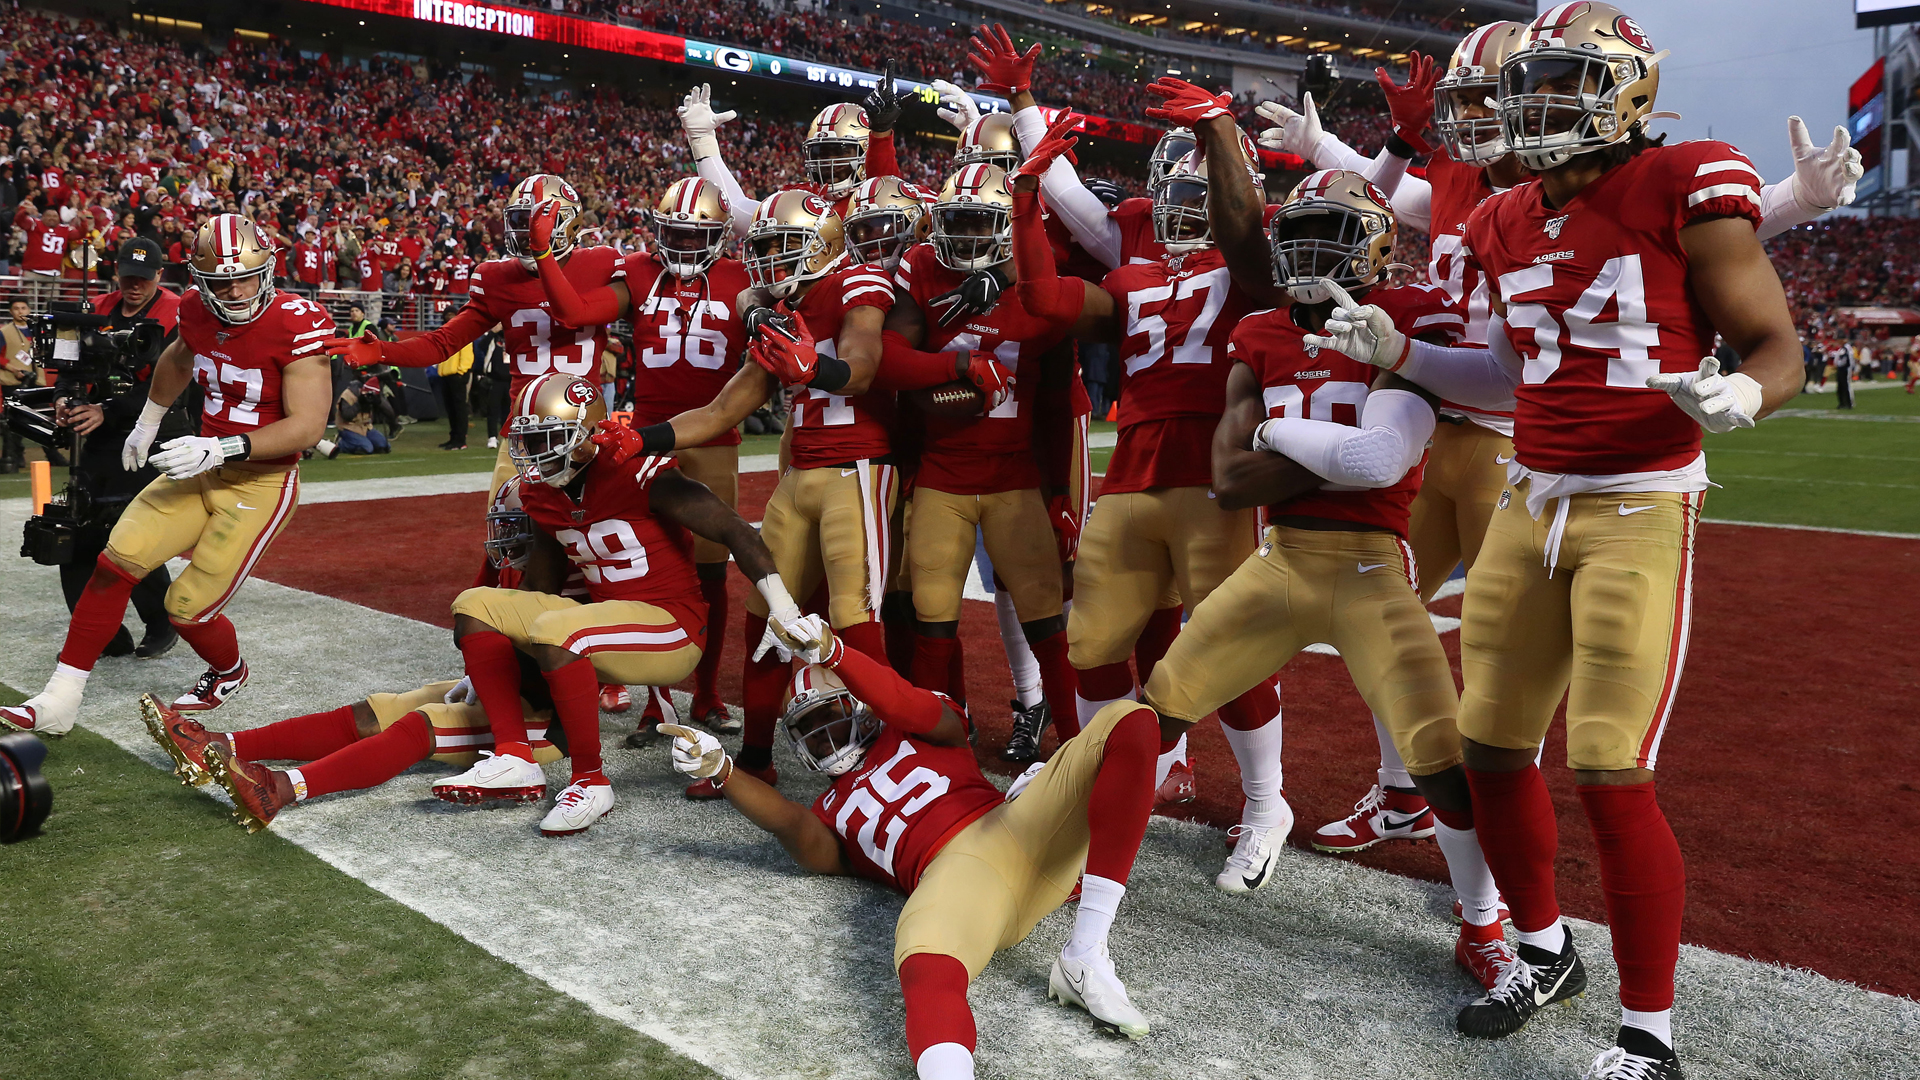 49ers to face Chiefs in Super Bowl 54 after beating Packers